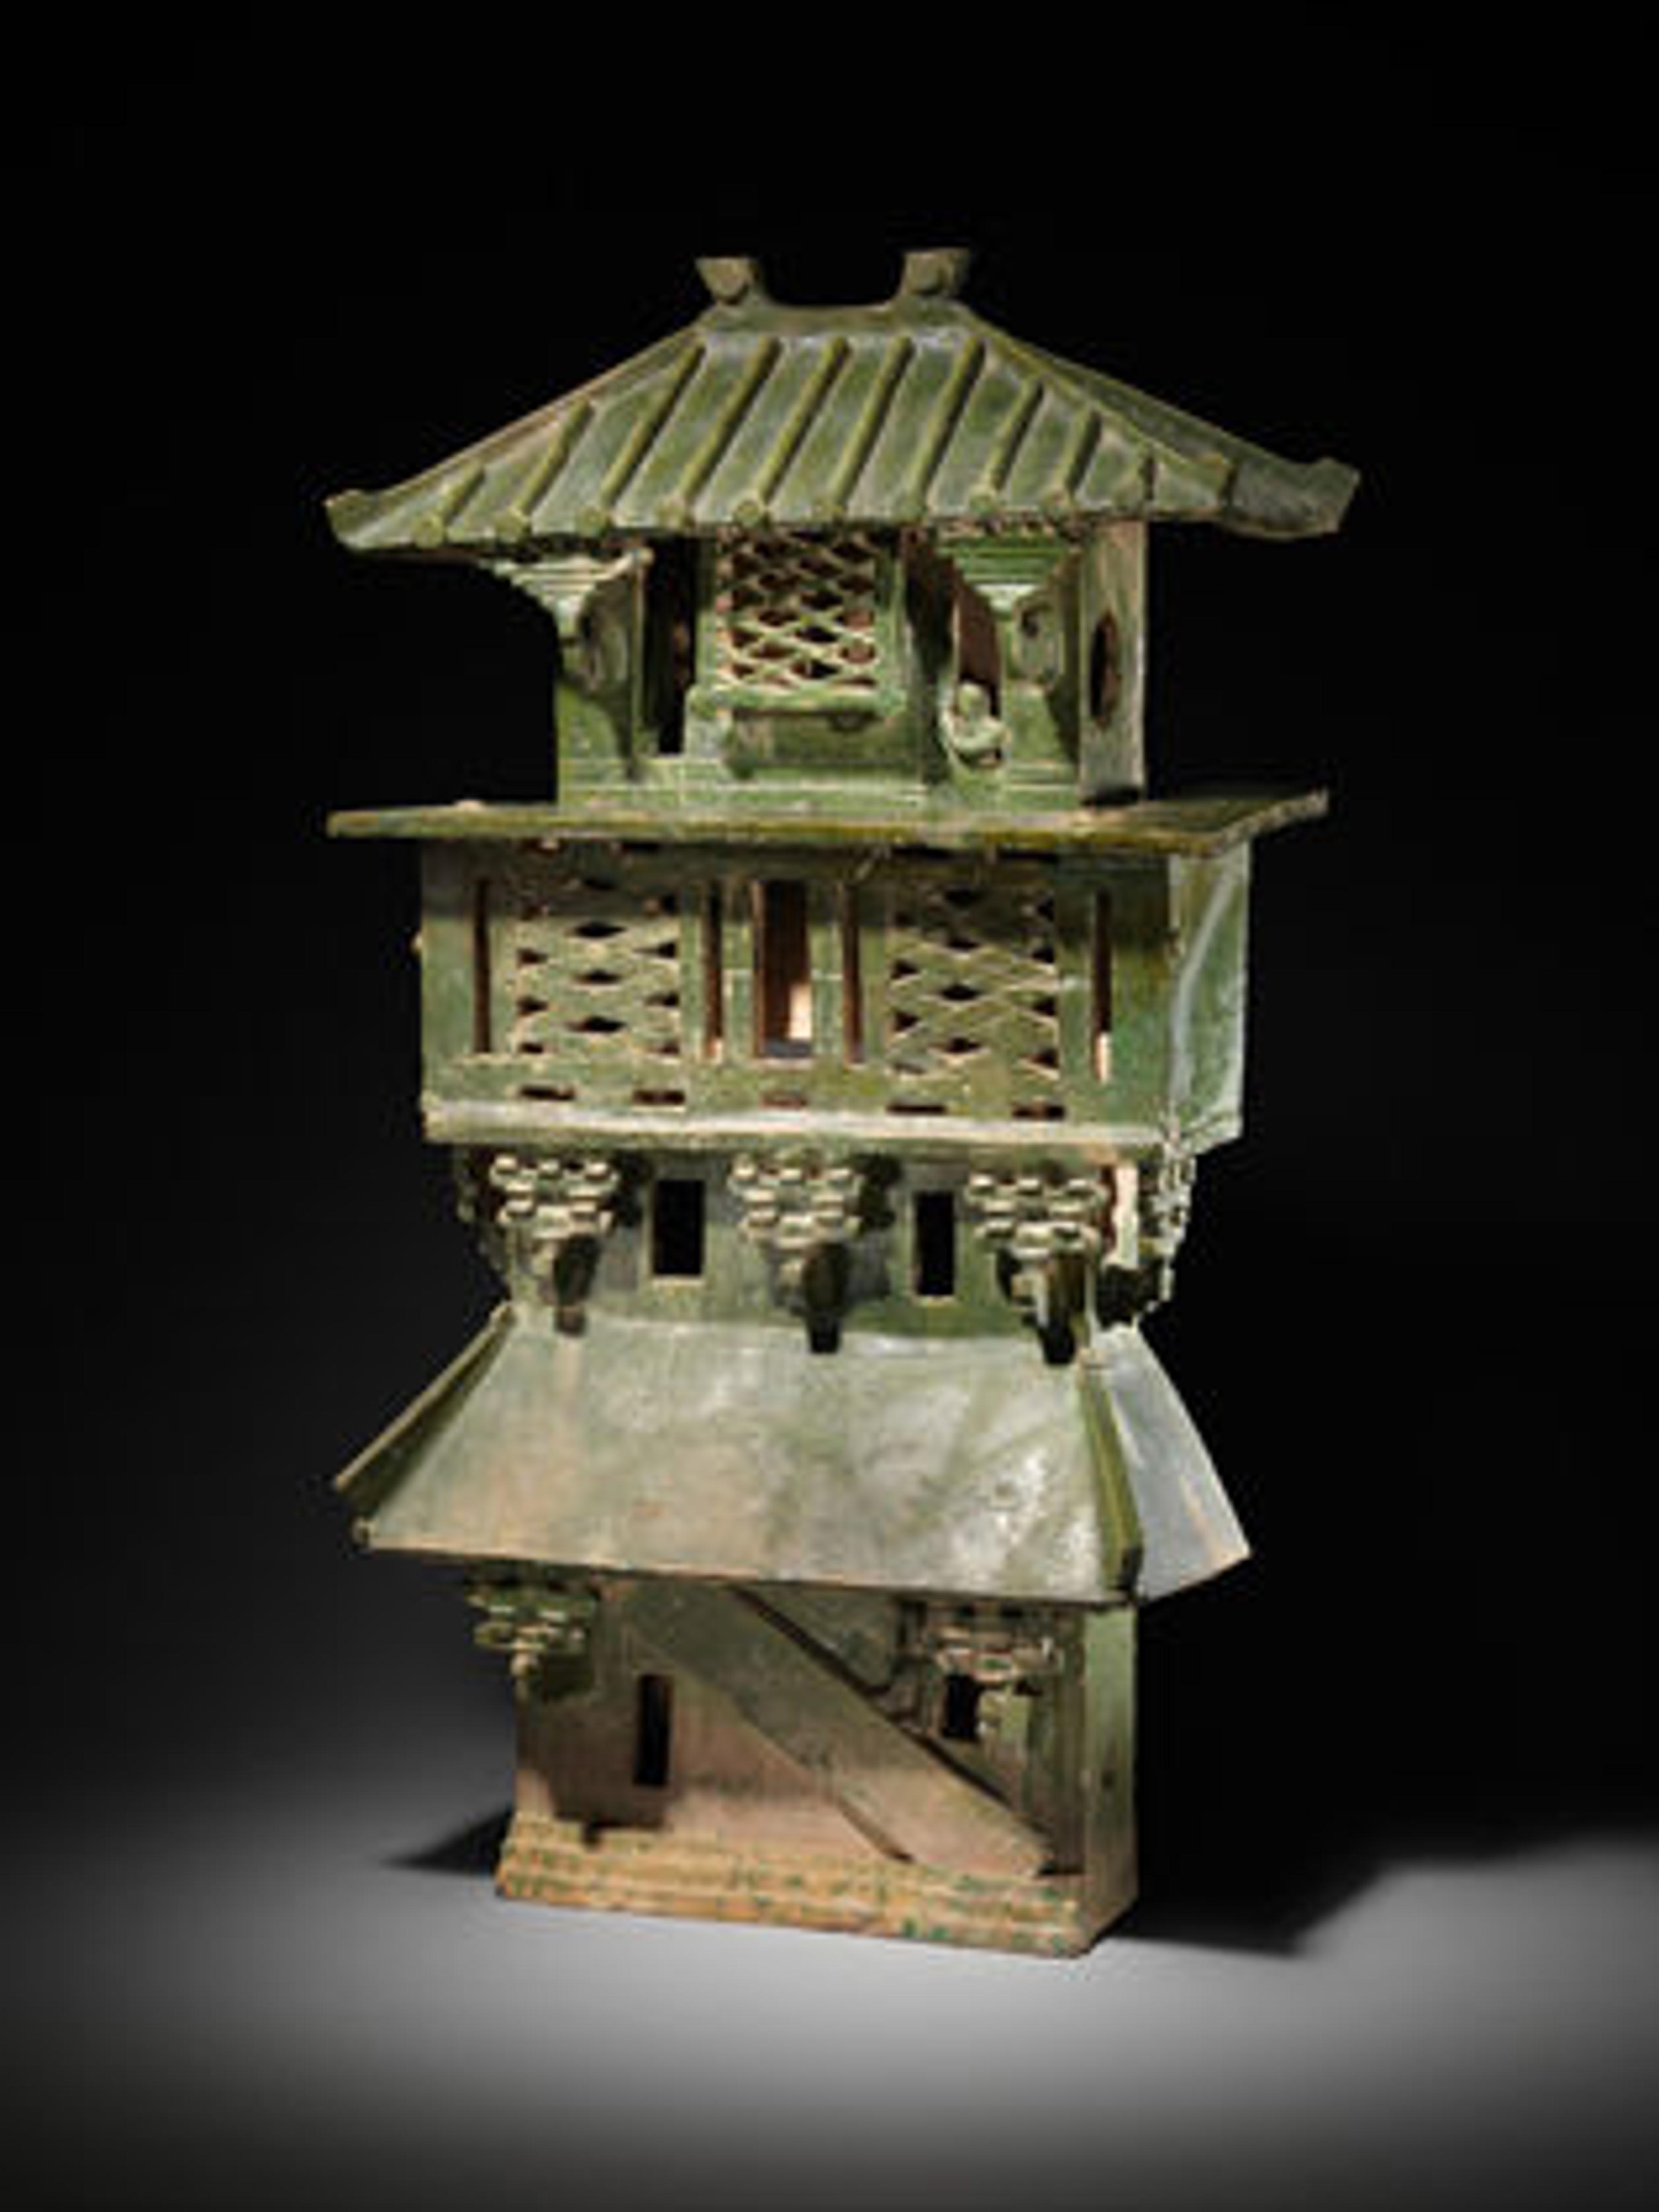 Central watchtower, 1st–early 3rd century. China, Eastern Han dynasty (25–220 A.D.). Earthenware with green lead glaze; H. 104.1 cm (41 in.), W. 57.5 cm (22 5/8 in.), D. 29.8 cm (11 3/4 in.). The Metropolitan Museum of Art, New York, Purchase, Dr. and Mrs. John C. Weber Gift, 1984 (1984.397a, b)